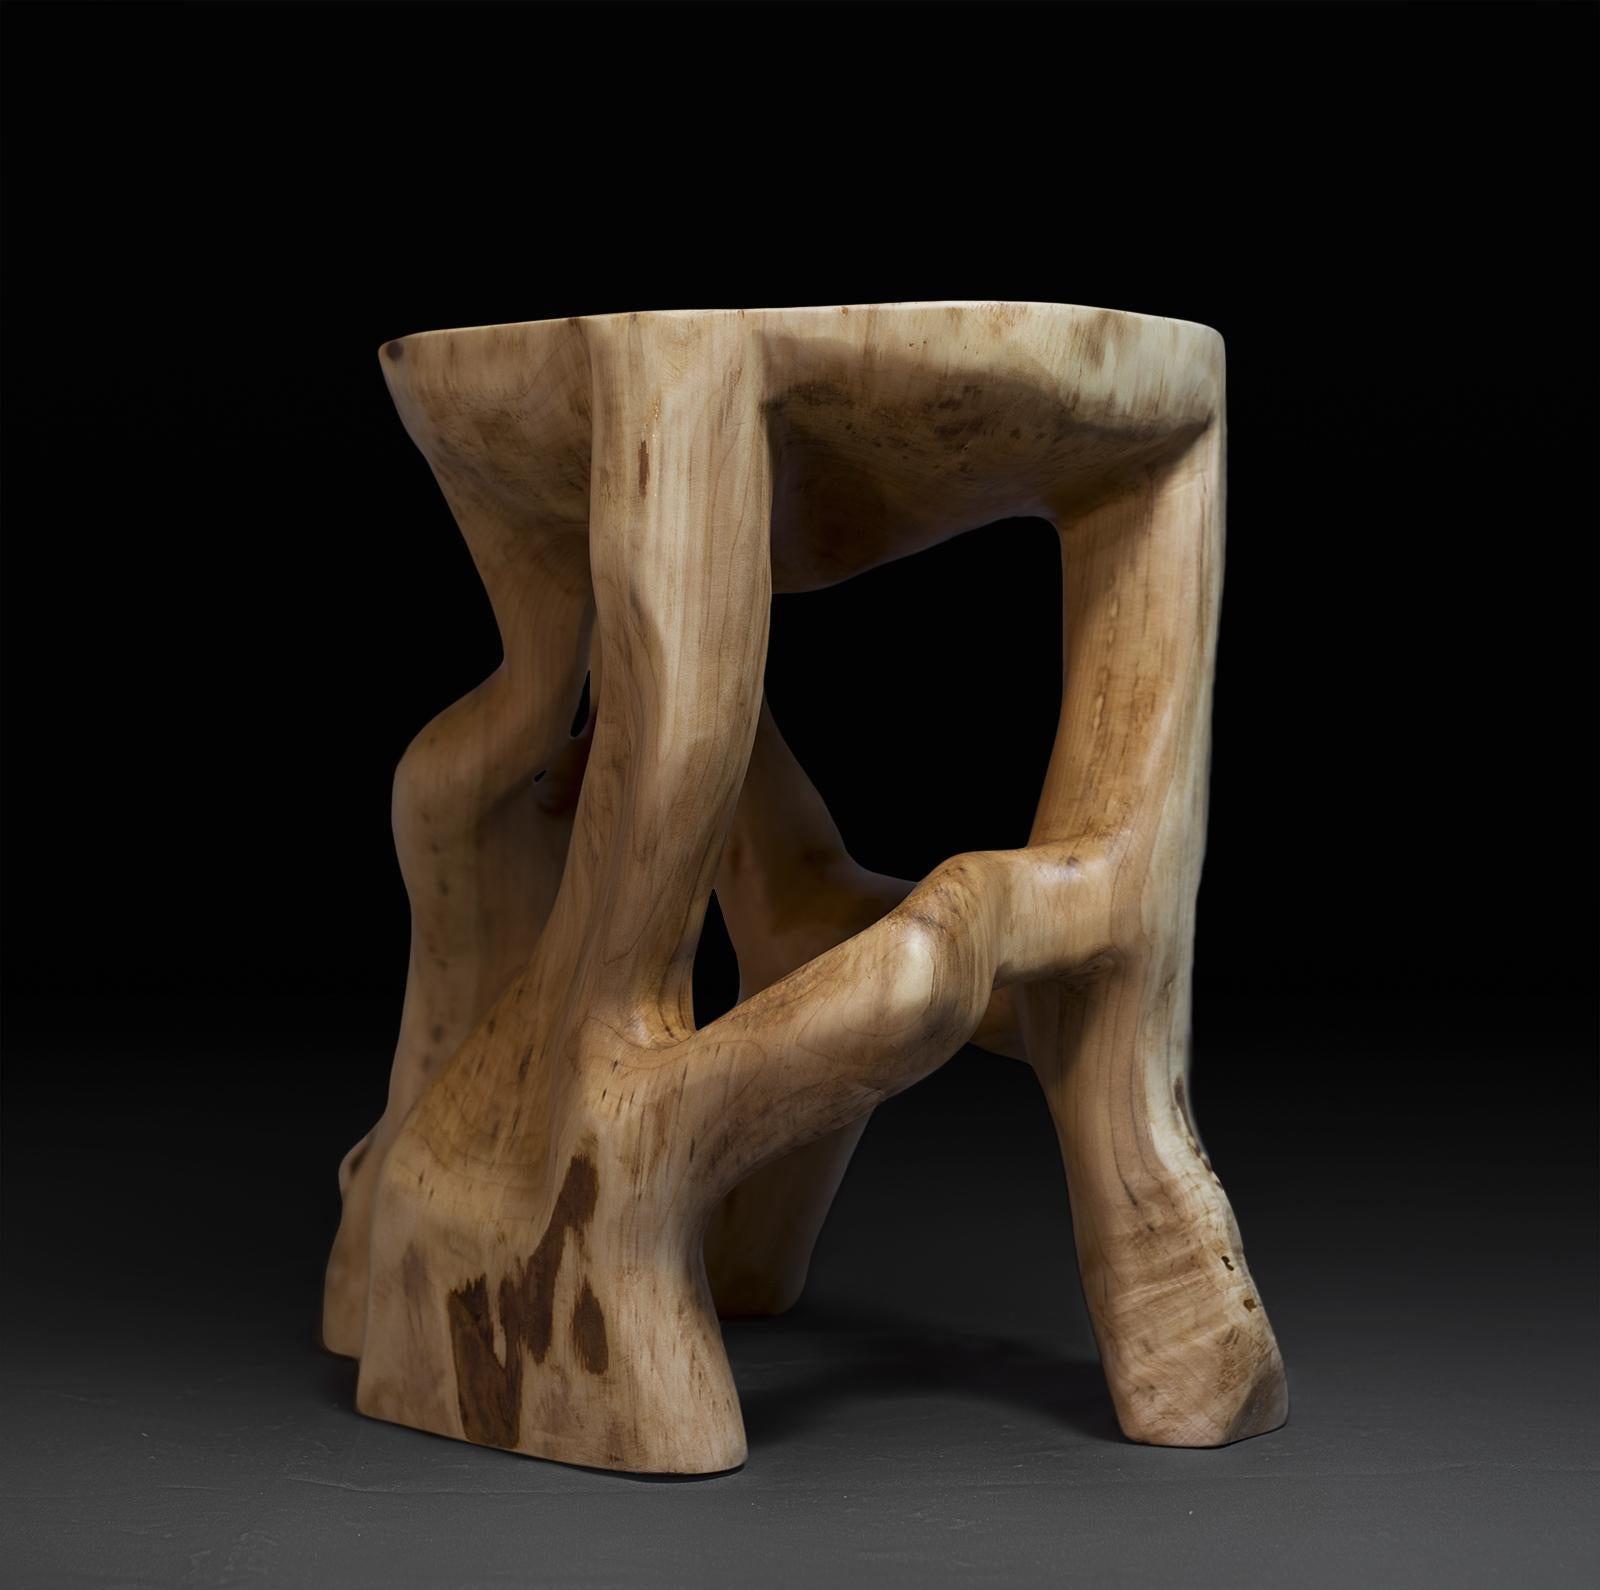 Carved Satyrs, Solid Wood Sculptural Side Table Original Contemporary Design, Logniture For Sale